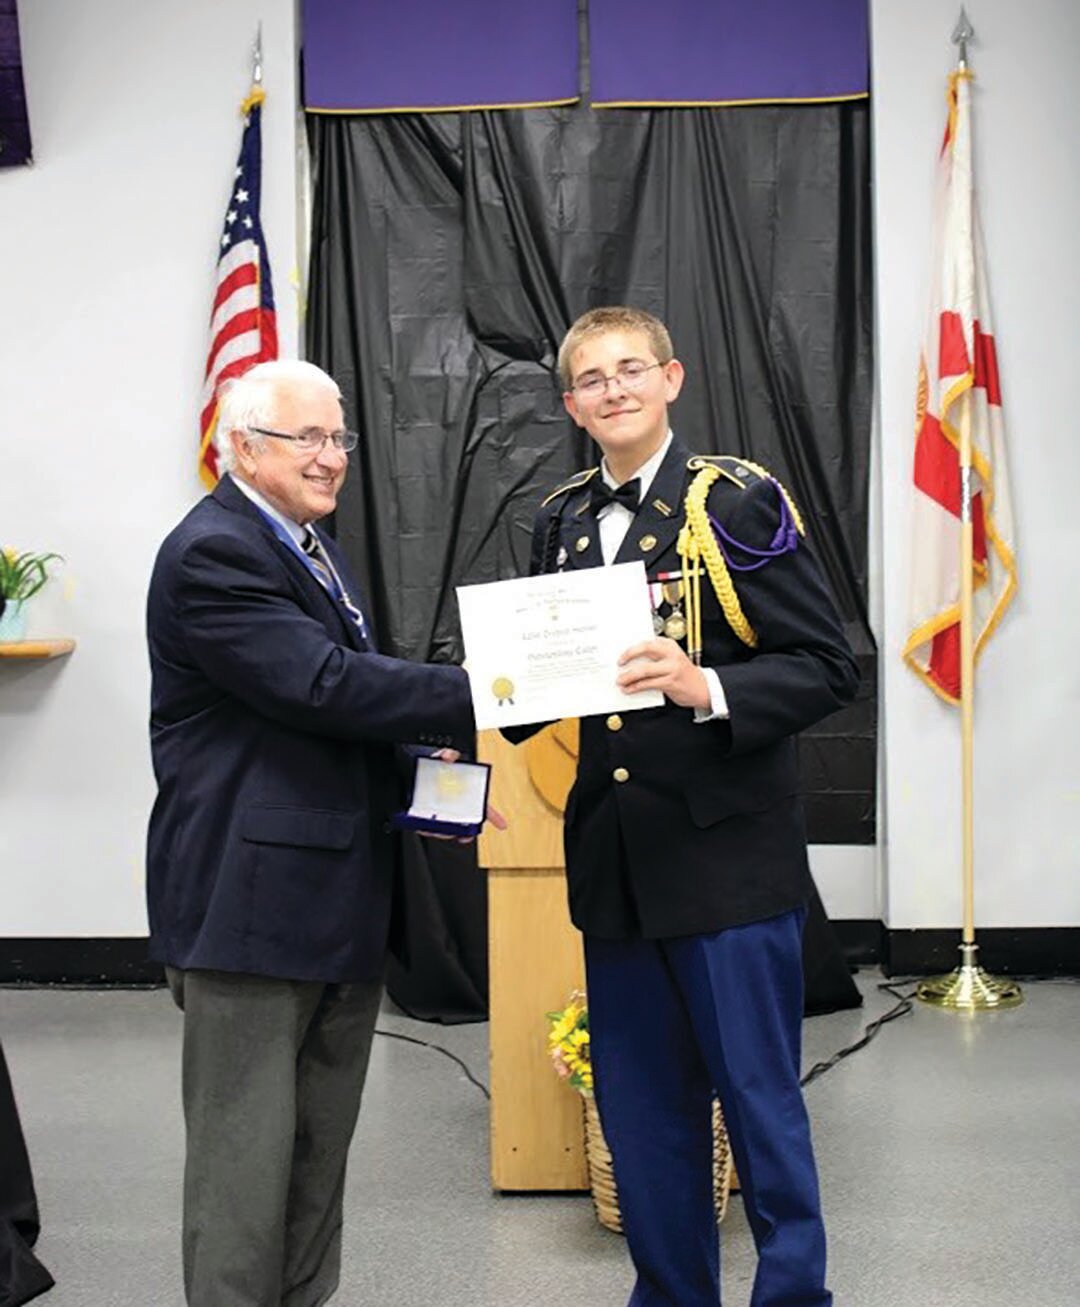 Treyvin Harden received the Sons of the American Revolution Outstanding JROTC Medal for his leadership.